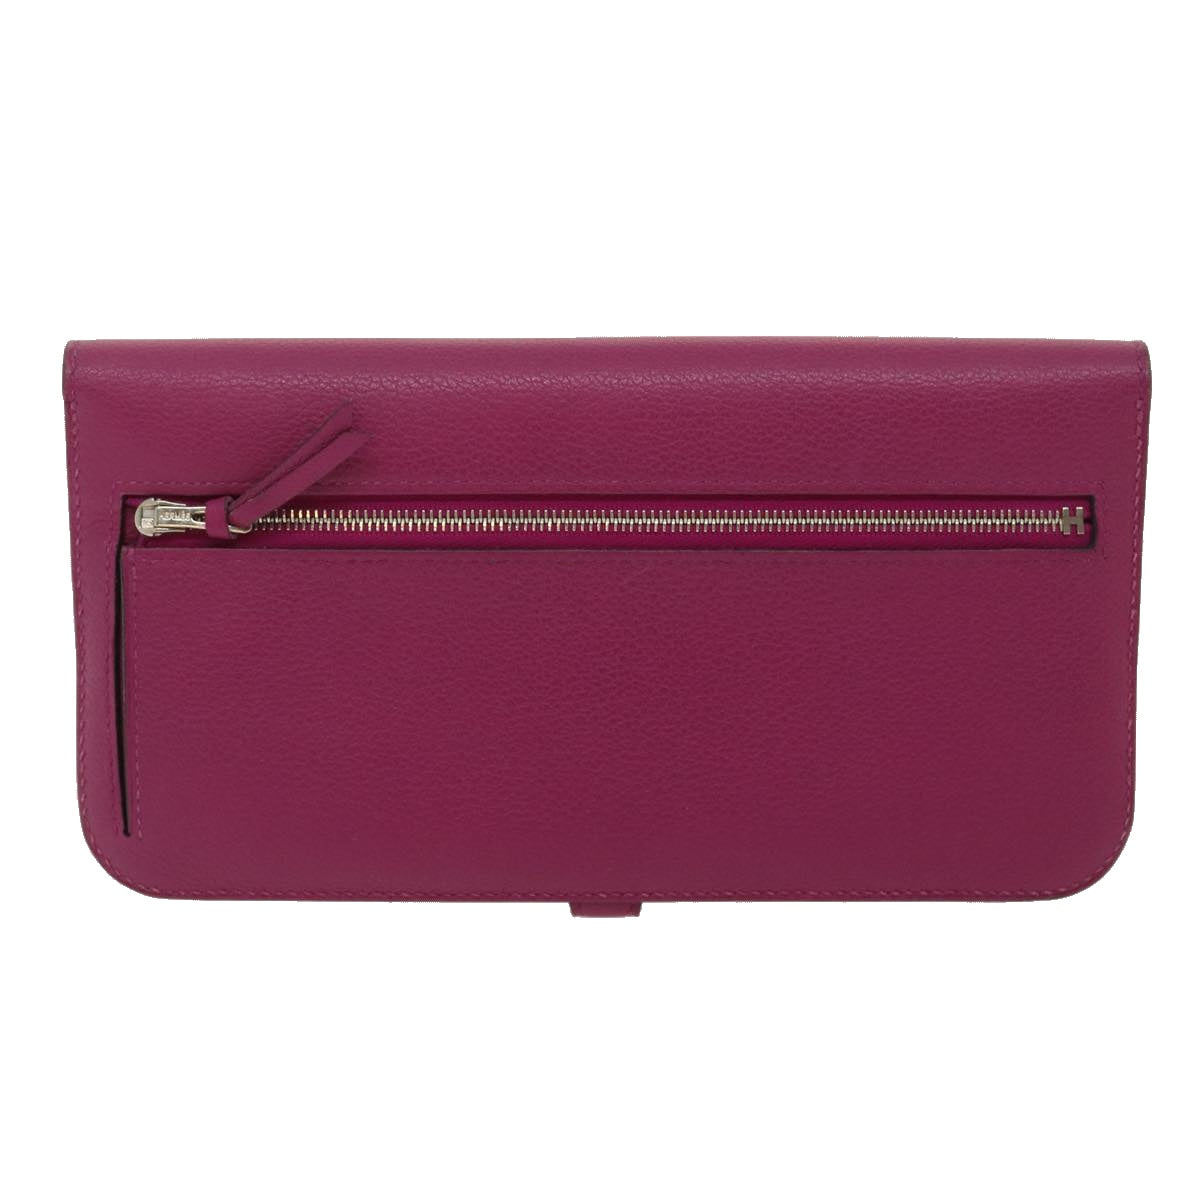 HERMES Dogon Wallet Leather Wine Red Auth ar6841